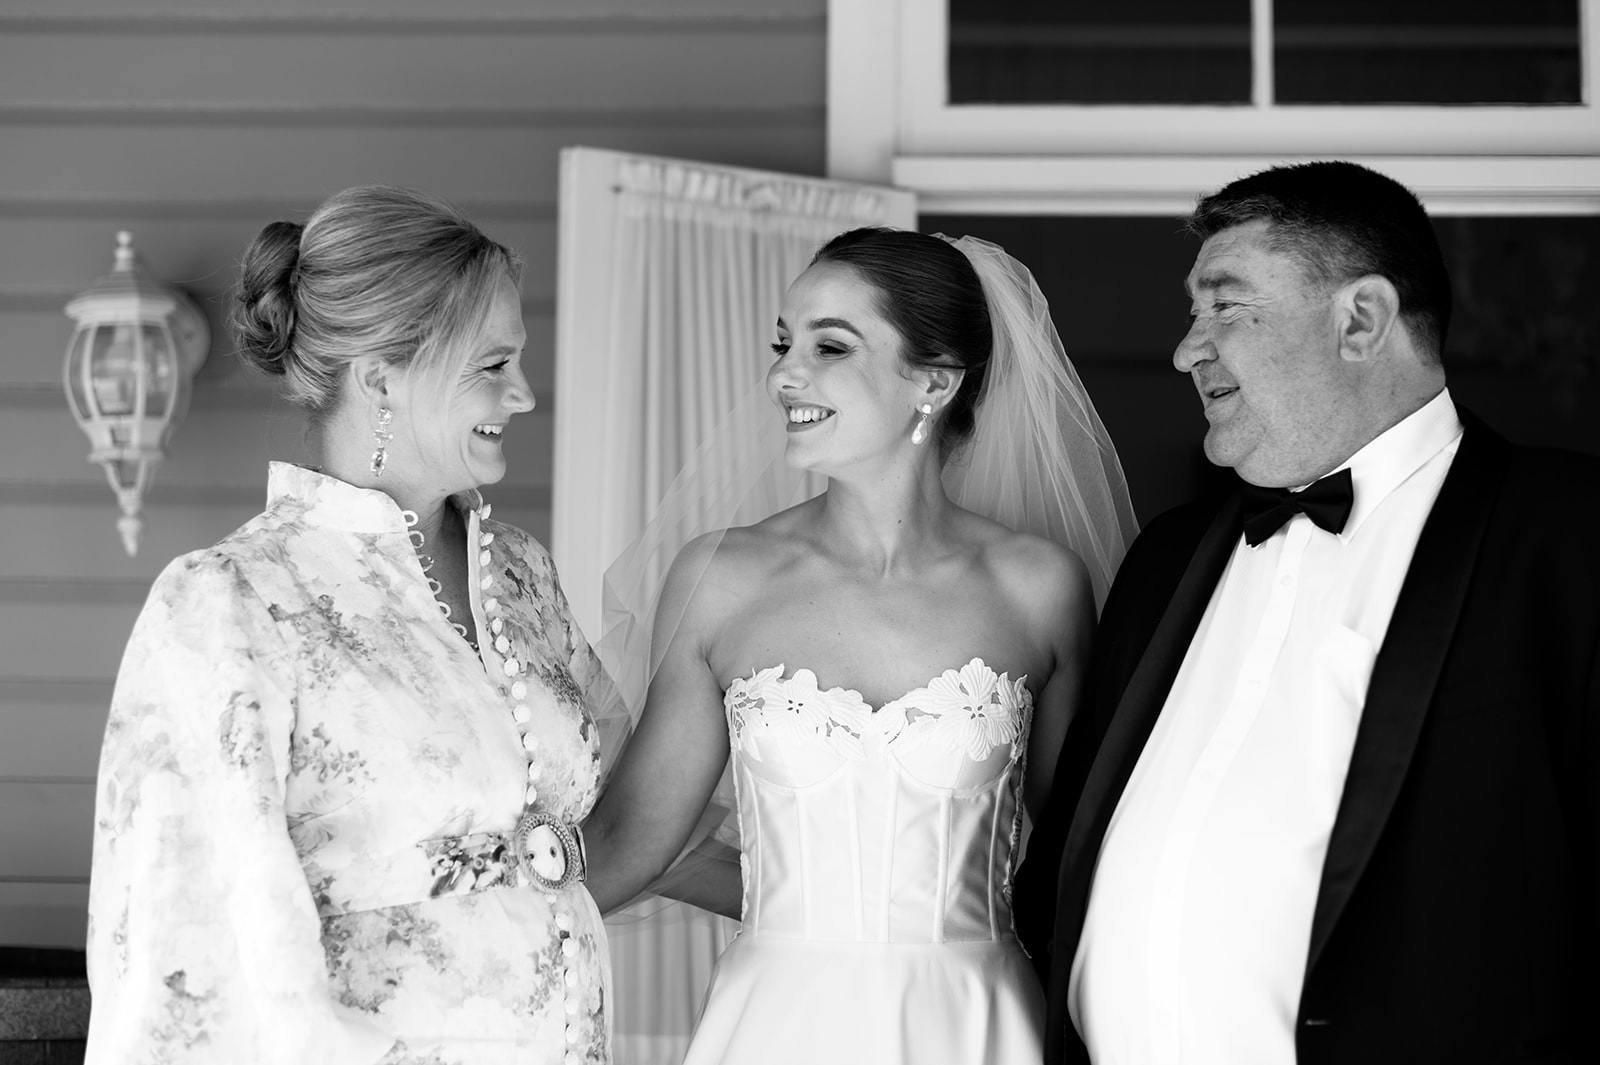 A bride in a strapless wedding dress and veil smiles, looking at a woman in a floral dress and a man in a tuxedo. They both smile back at her. They appear to be standing on a porch with a window in the background.